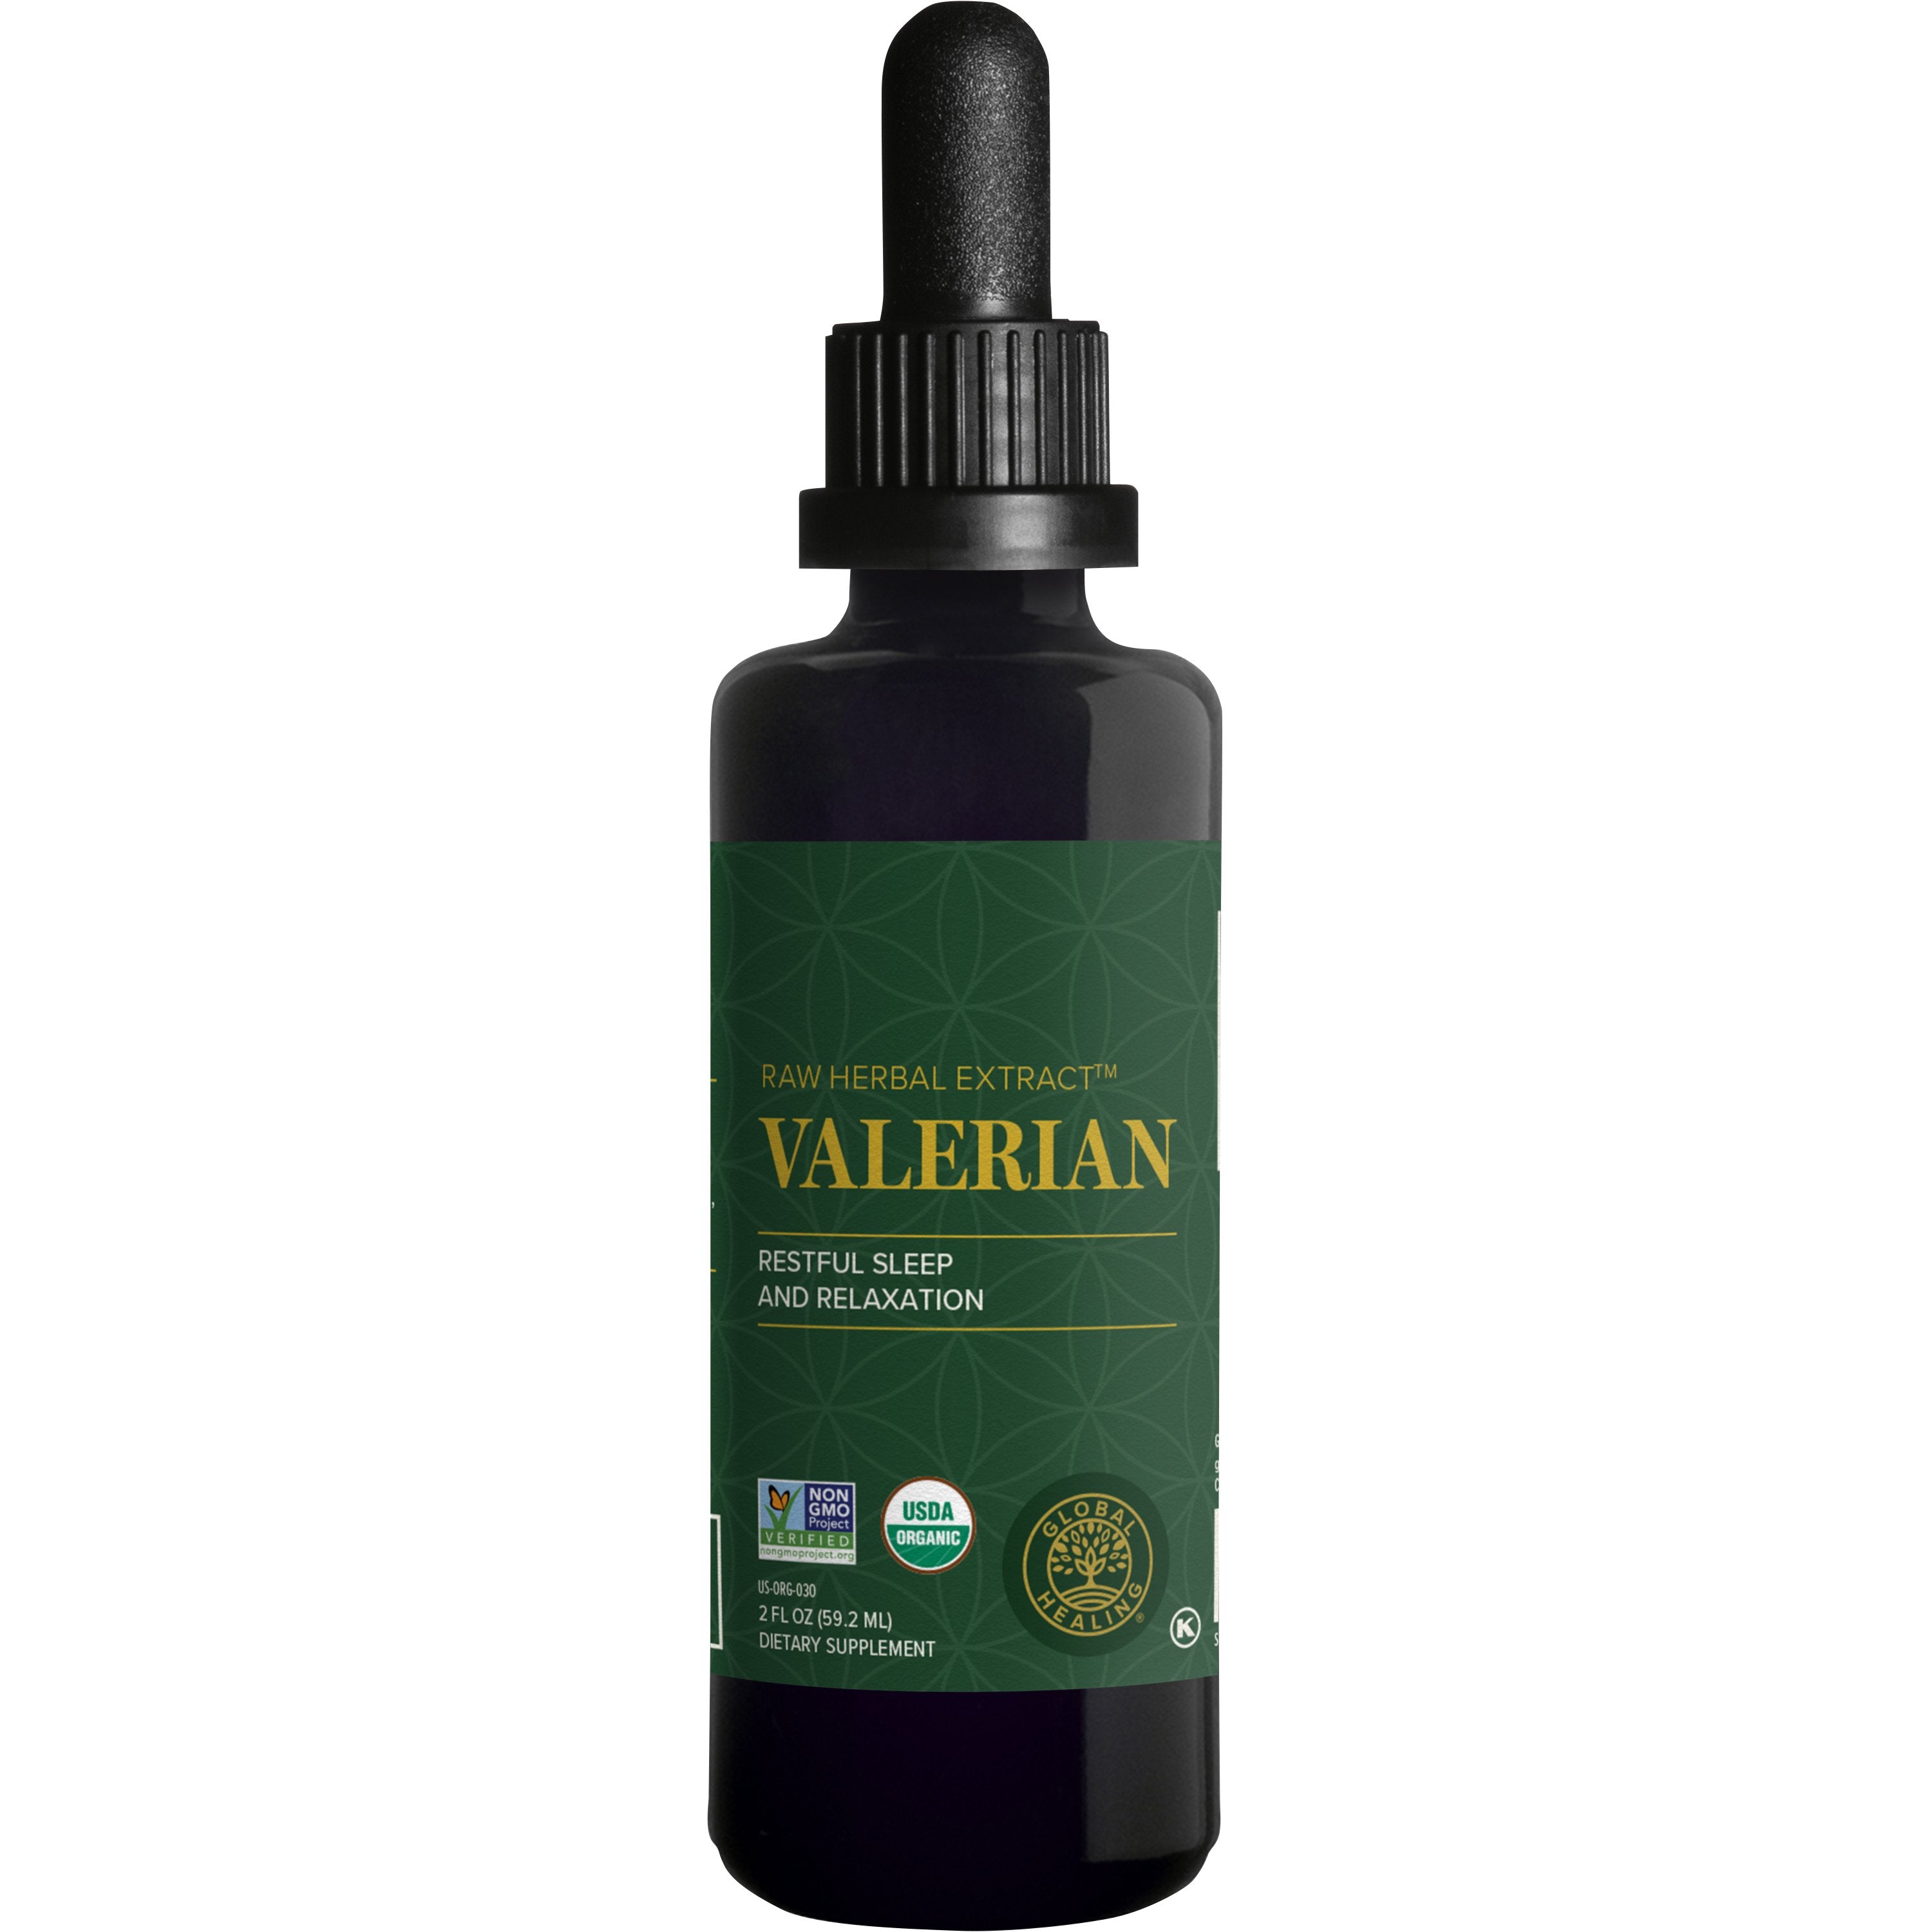 Image of a Bottle of Raw Herbal Extract Valerian by Global Healing - Restful Sleep and Relaxation